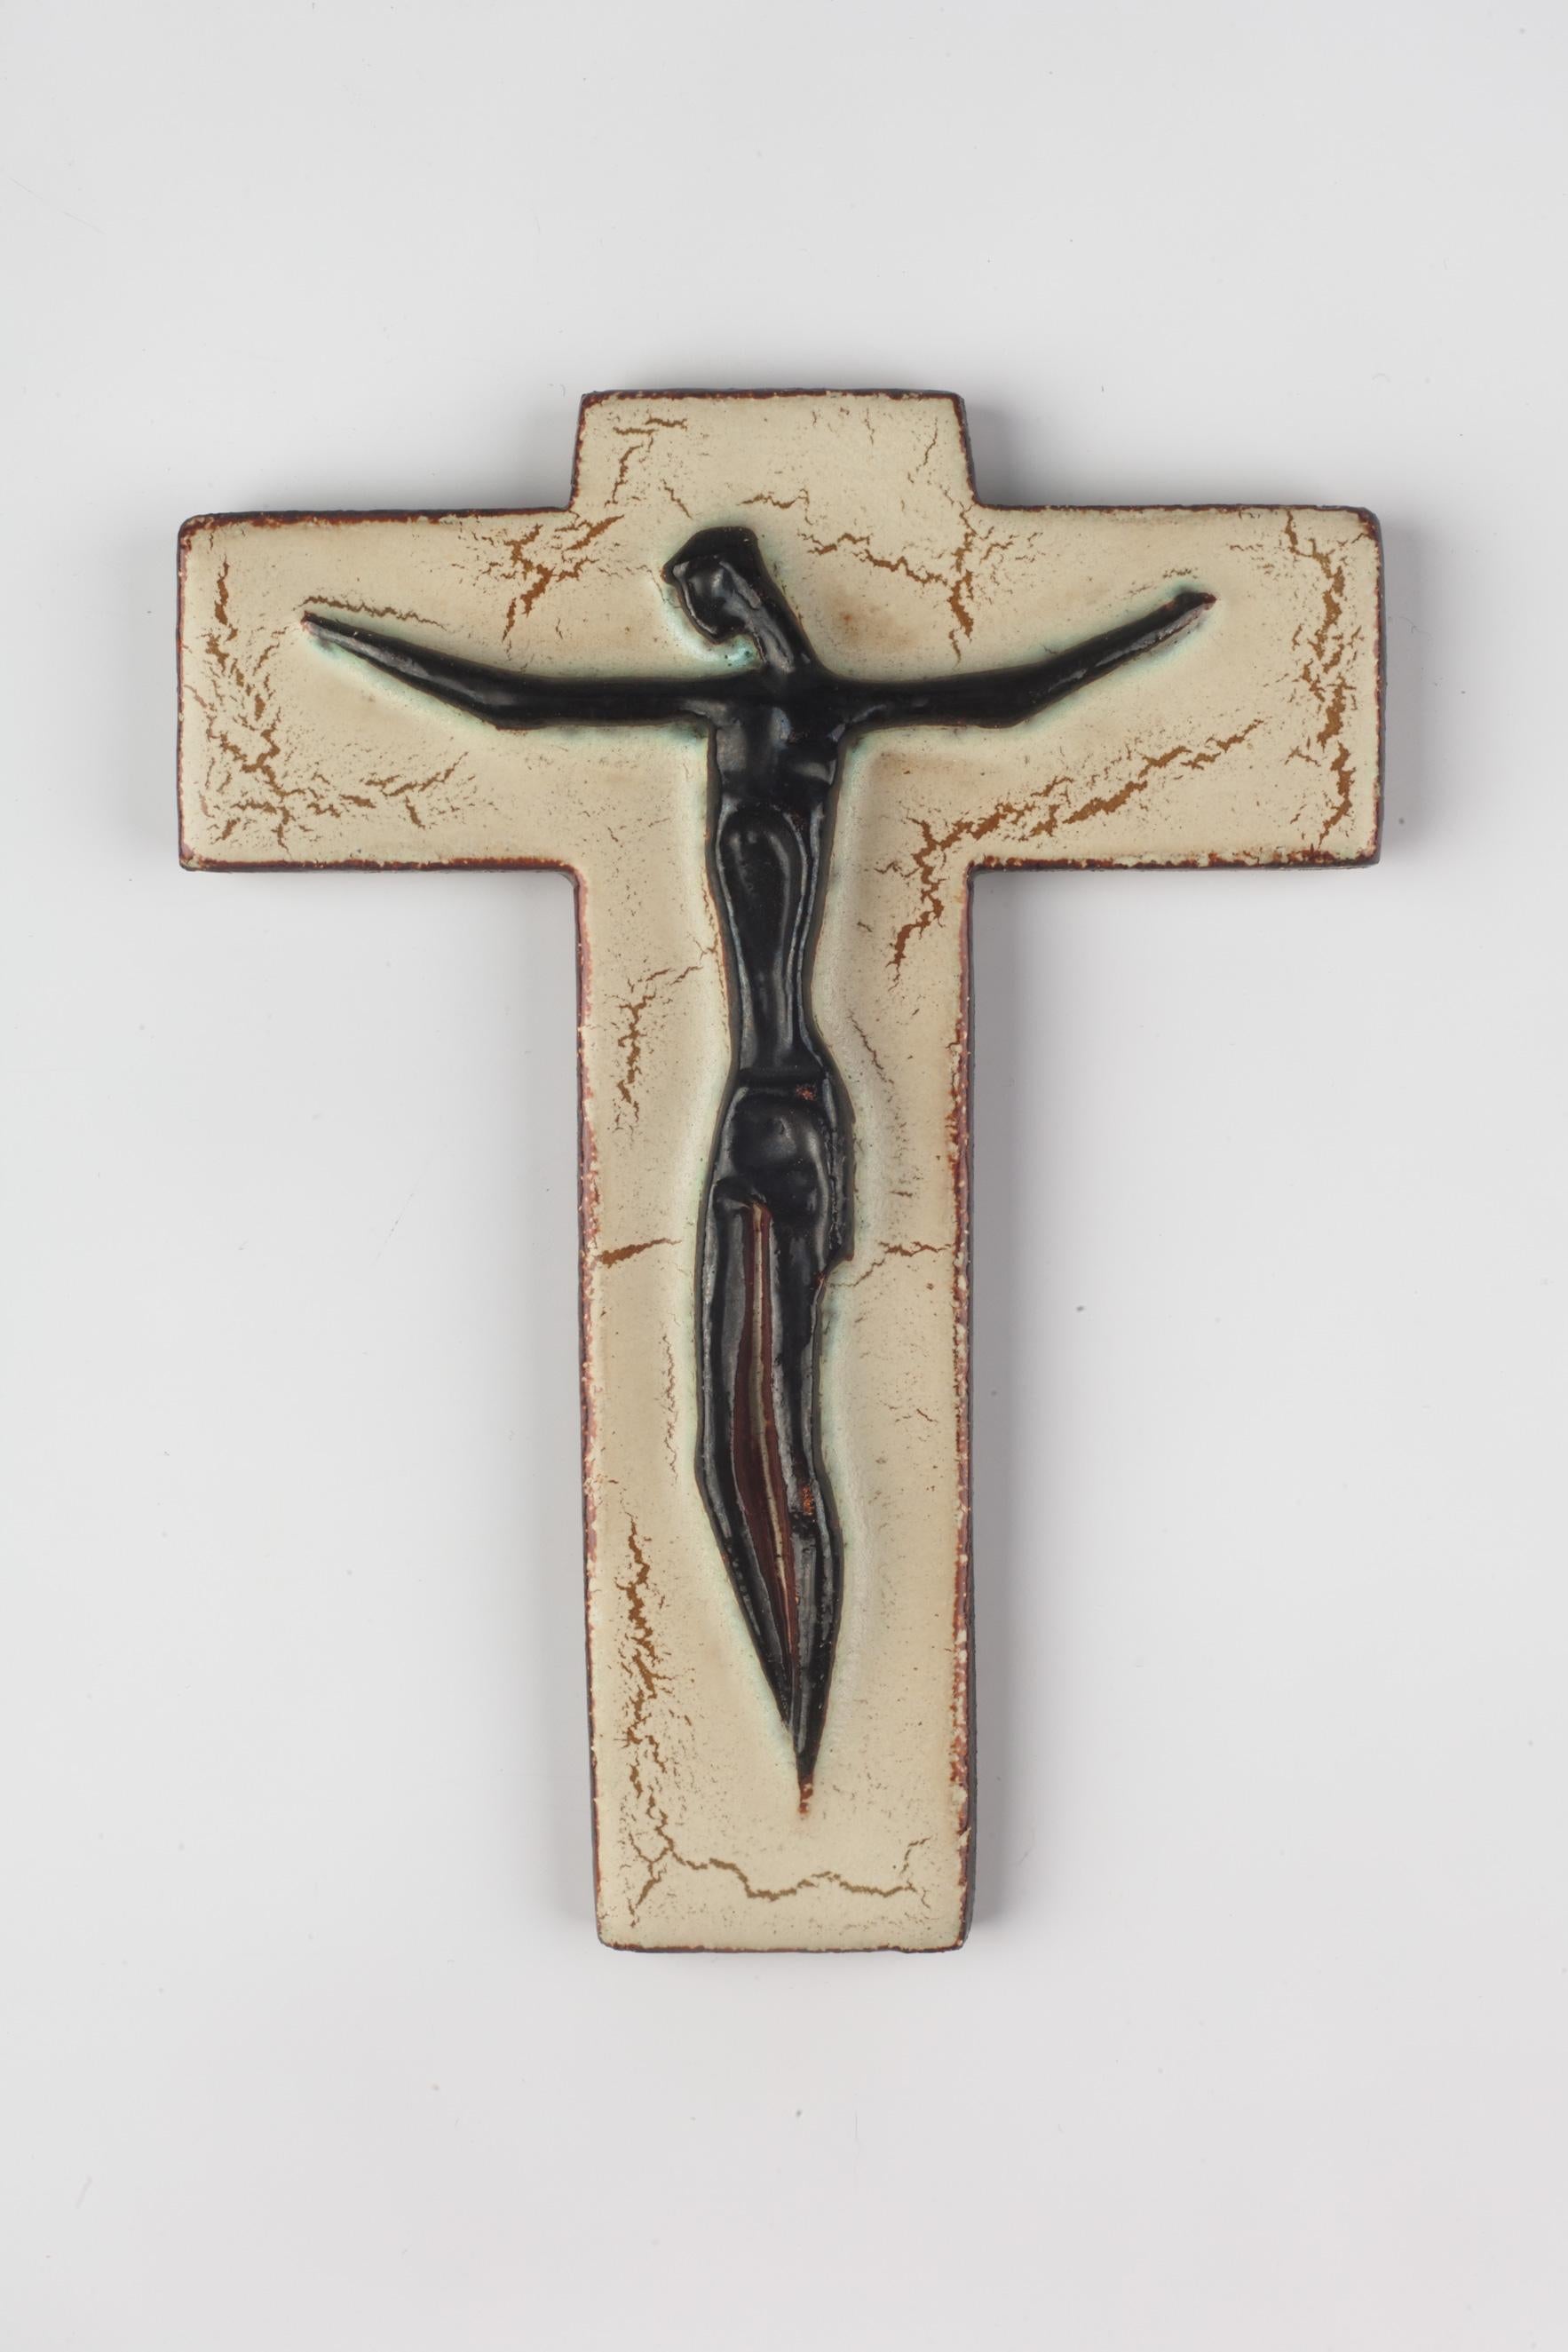 European mid-century ceramic crucifix hand-painted in black, brown and beige with a crackled paint style on the cross. A raised black Christ figure adds volume. 

DIMENSIONS

6 in. H x 4.5 in. W x 0.5 in. D
15 cm H x 11 cm W x 1 cm D

This